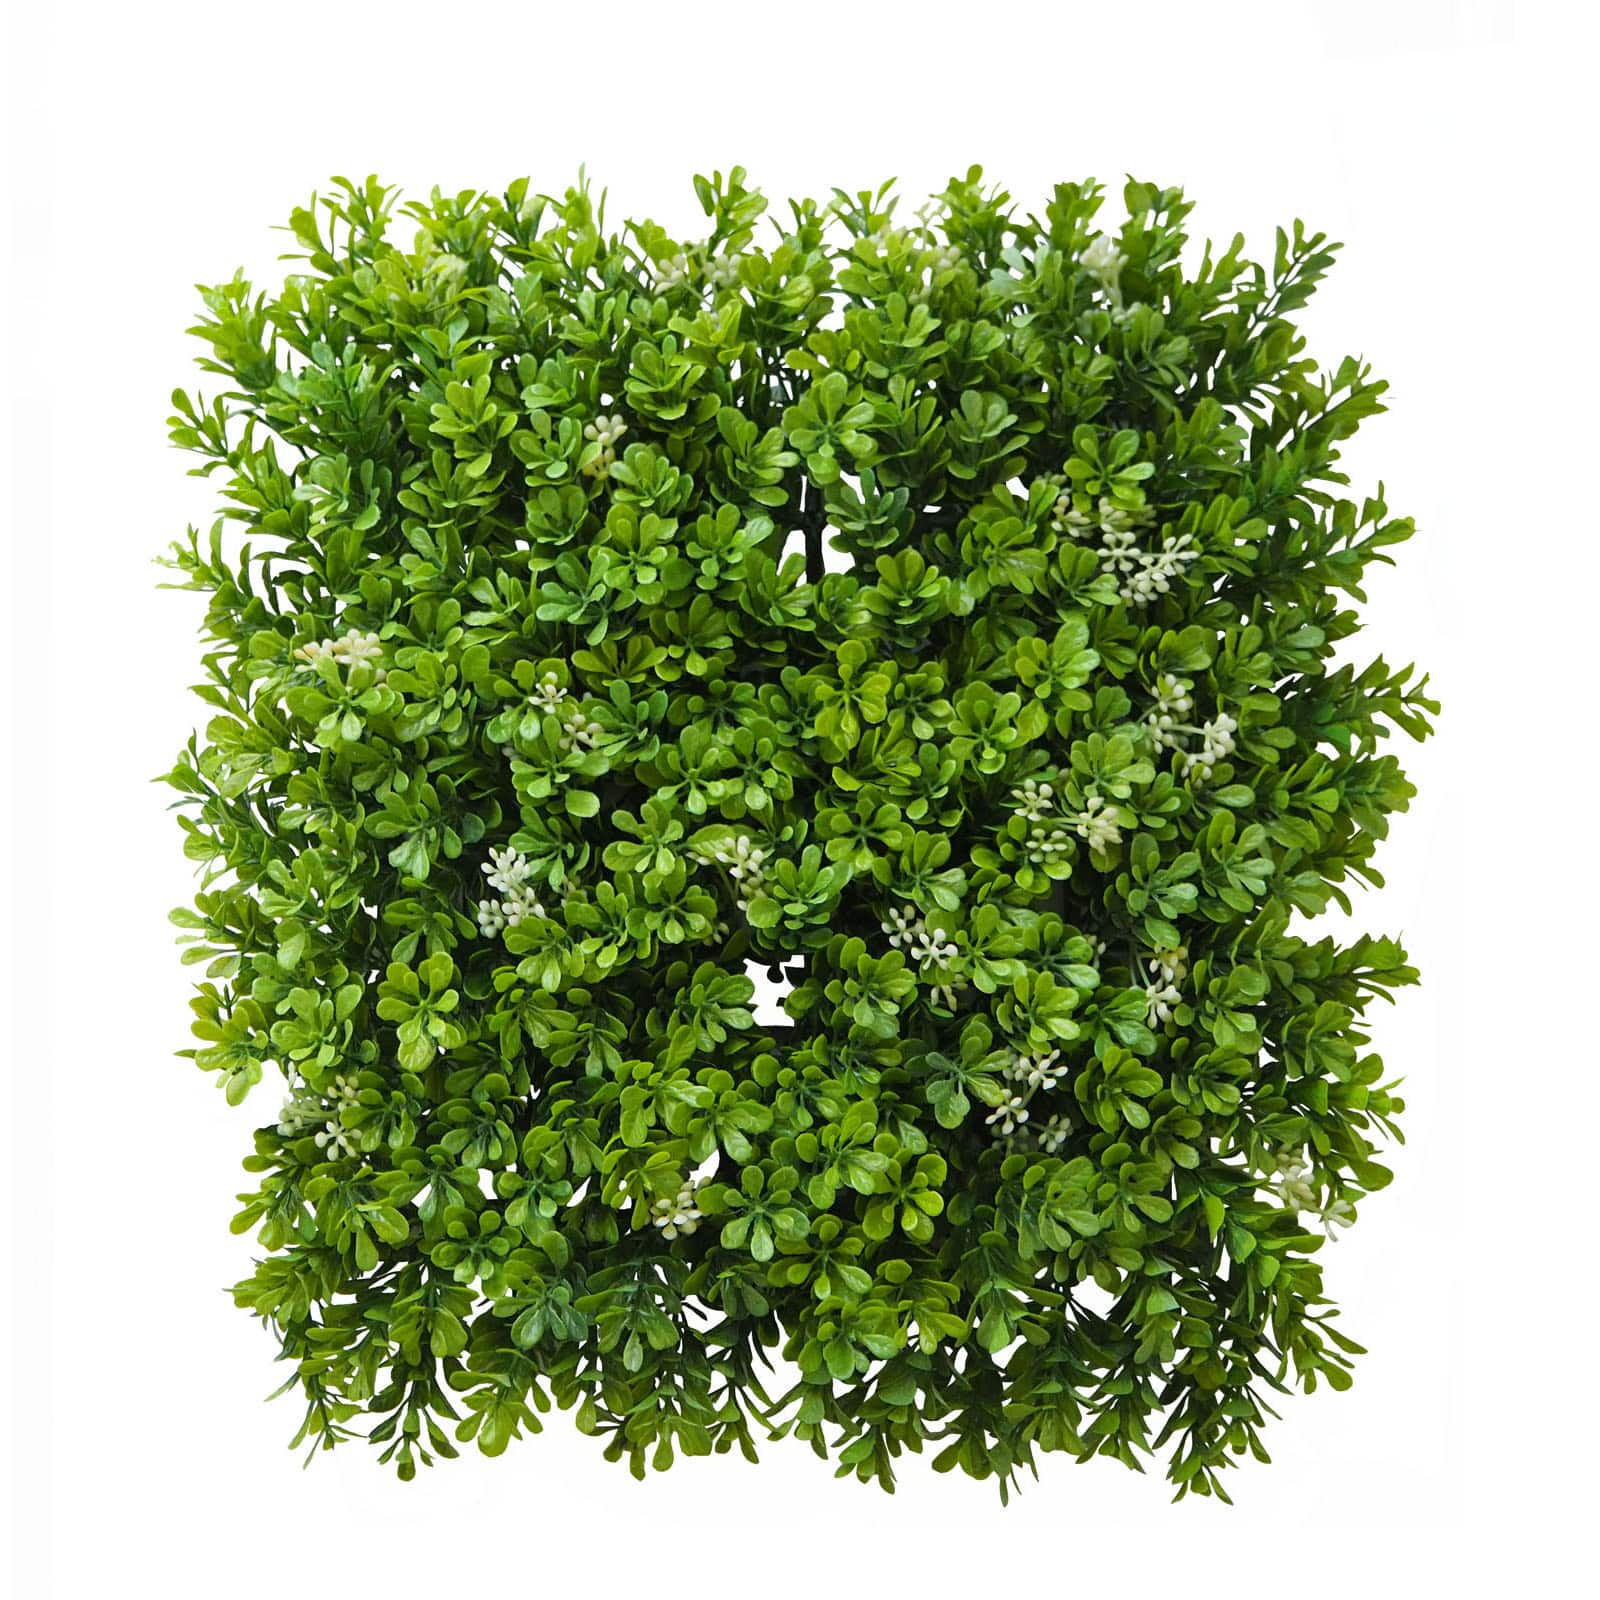 Shop For The Large Boxwood Mat By Ashland At Michaels